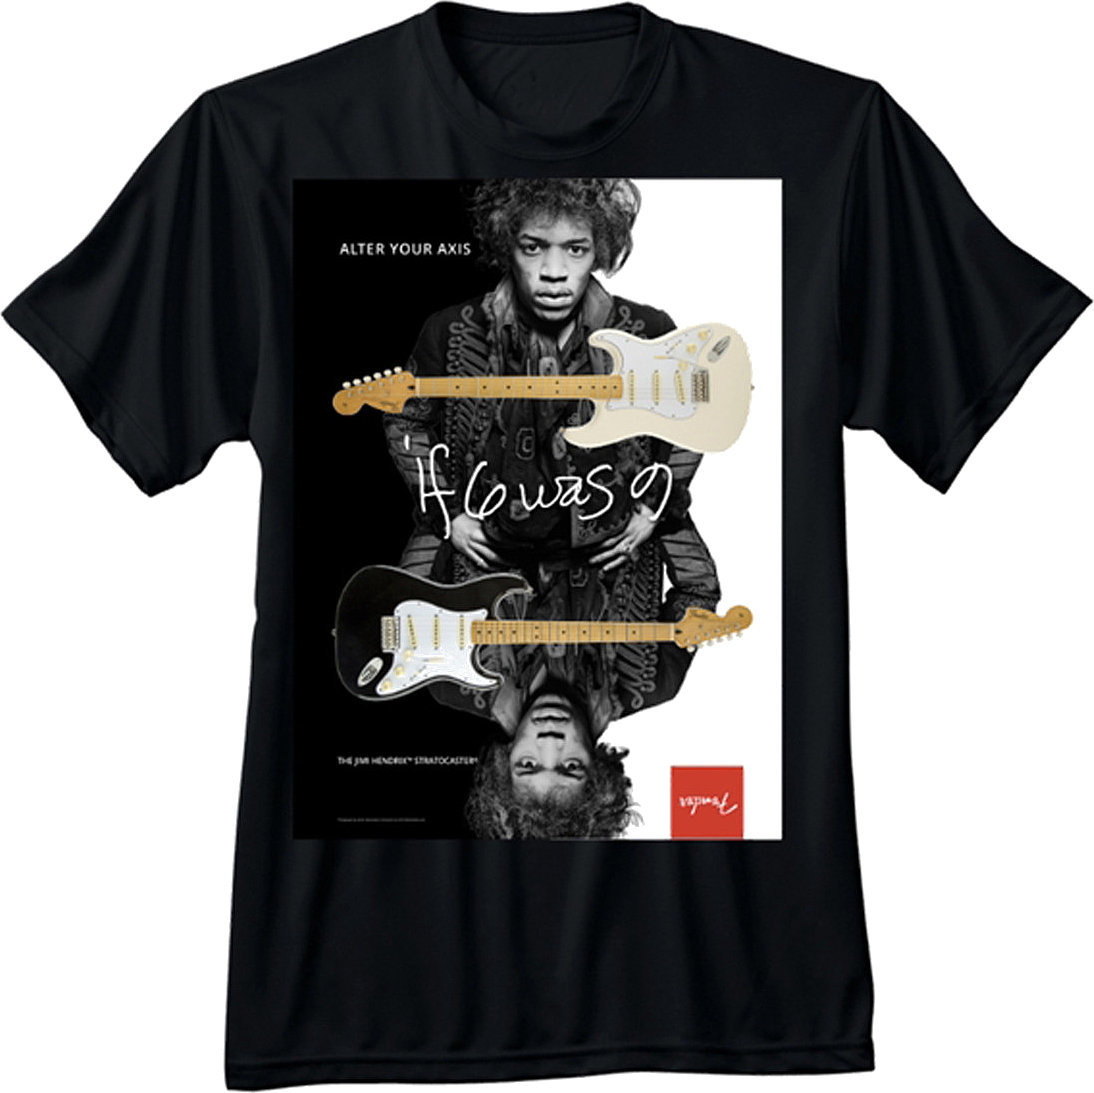 Skjorta Fender Jimi Hendrix Collection Alter Your Axis T-Shirt Black XL